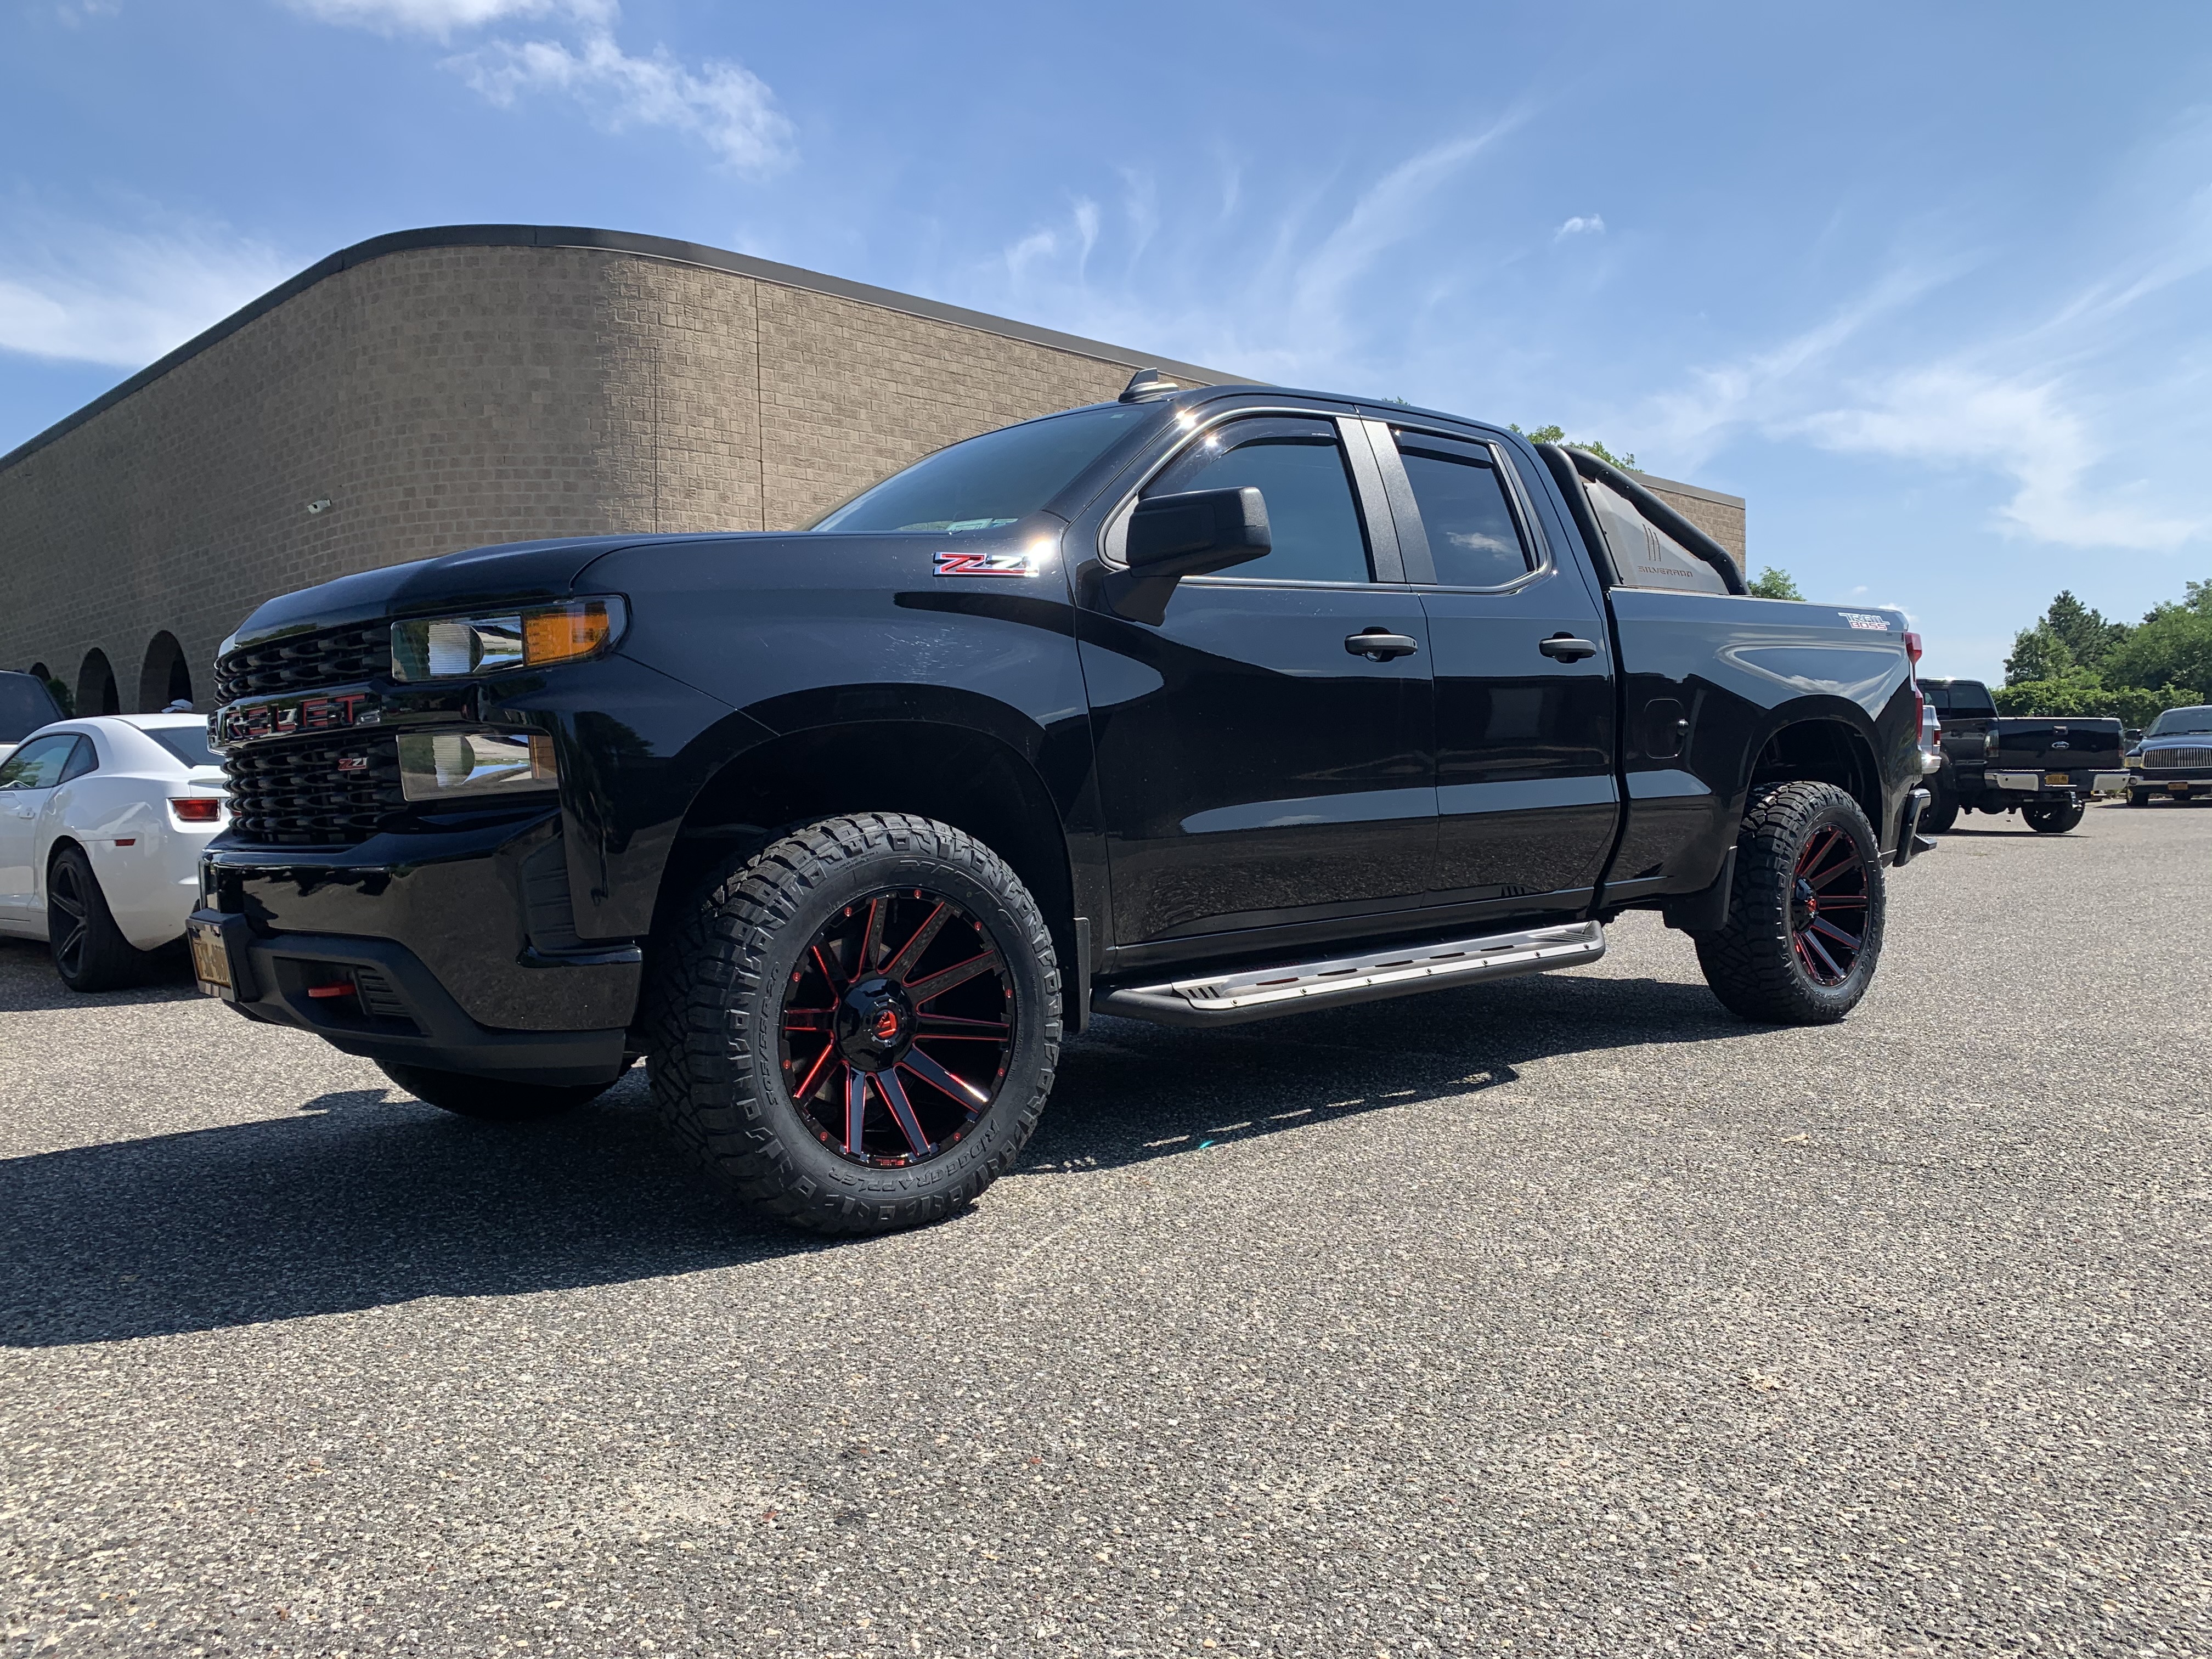 Black Chevrolet Silverado lifted with wheels and tires